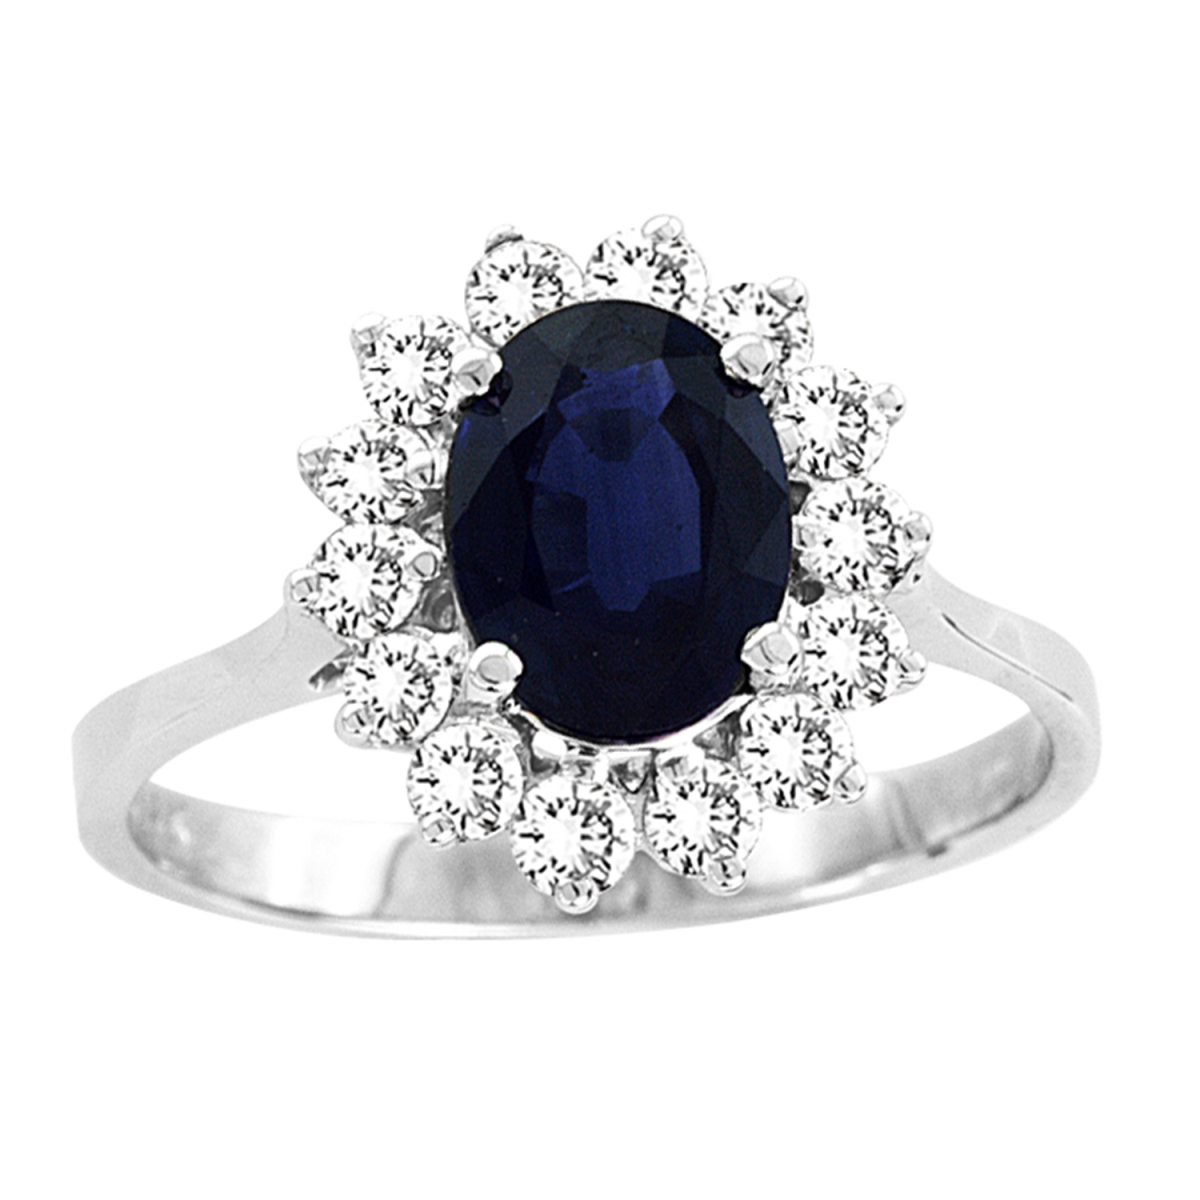 Picture of Louis Creations R1548SD-7 14K Gold Royal Collection 1.75 CTTW 8 x 6 mm 1.35 Carat Oval Sapphire Center Stone Natural Sapphire & Diamond Ring - Size 7